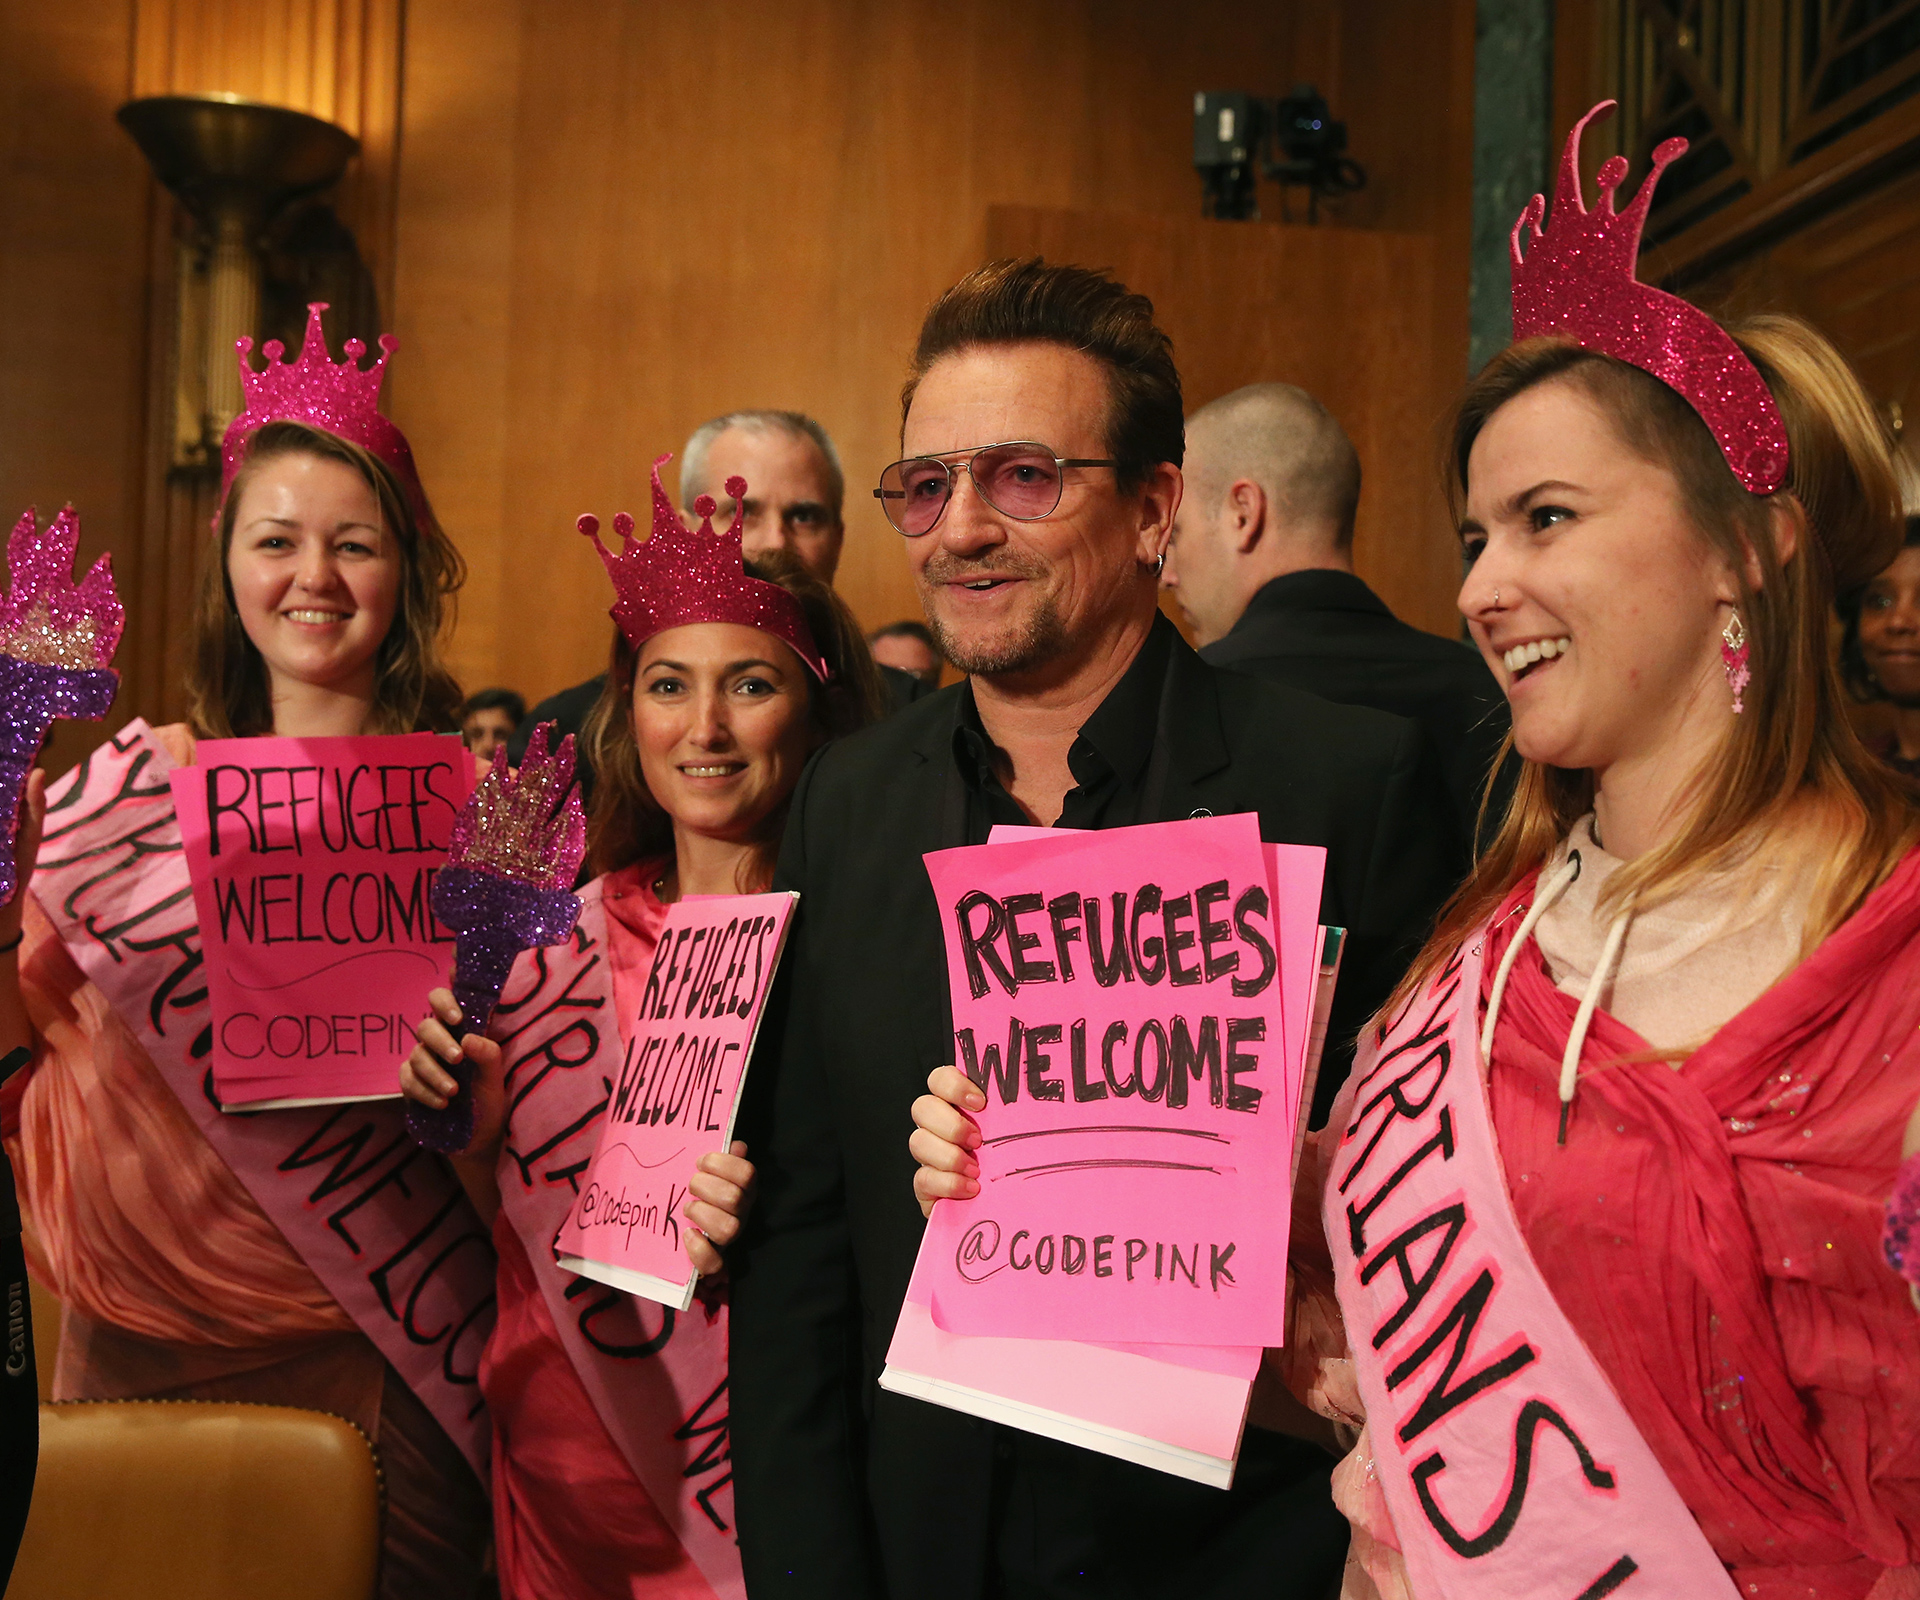 Not everyone is happy Bono has been given Glamour’s ‘Woman of the Year’ award